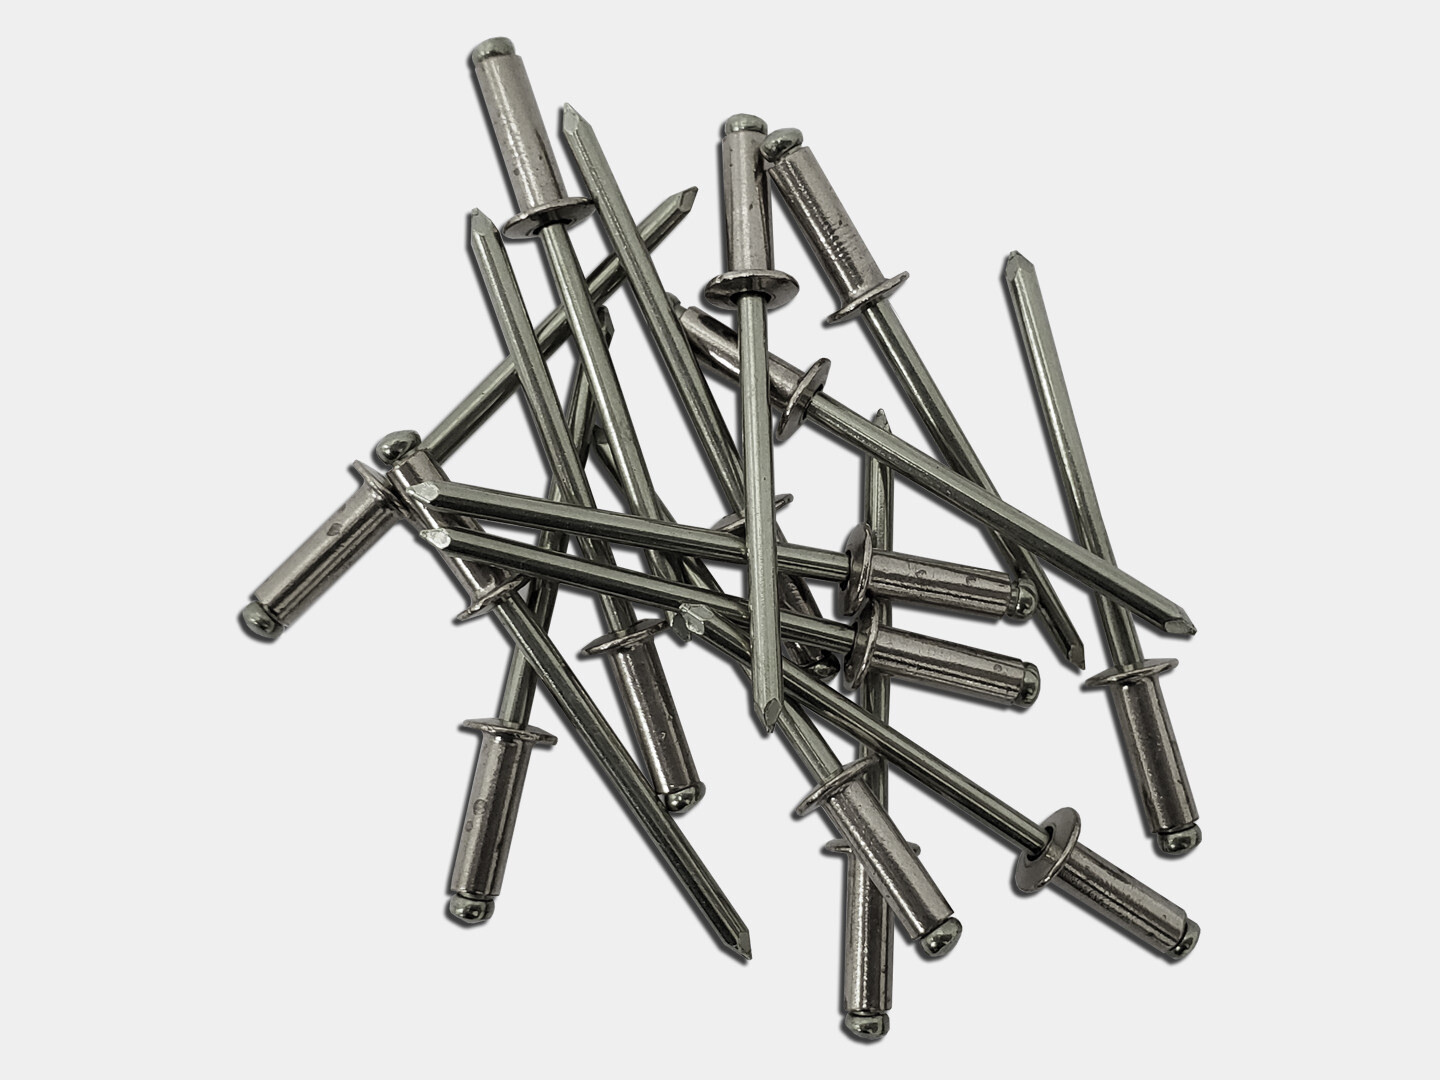 POP Rivets Stainless Steel Blind Rivets 8-12 1/4 x 3/4 Grip USA Made Qty 100 